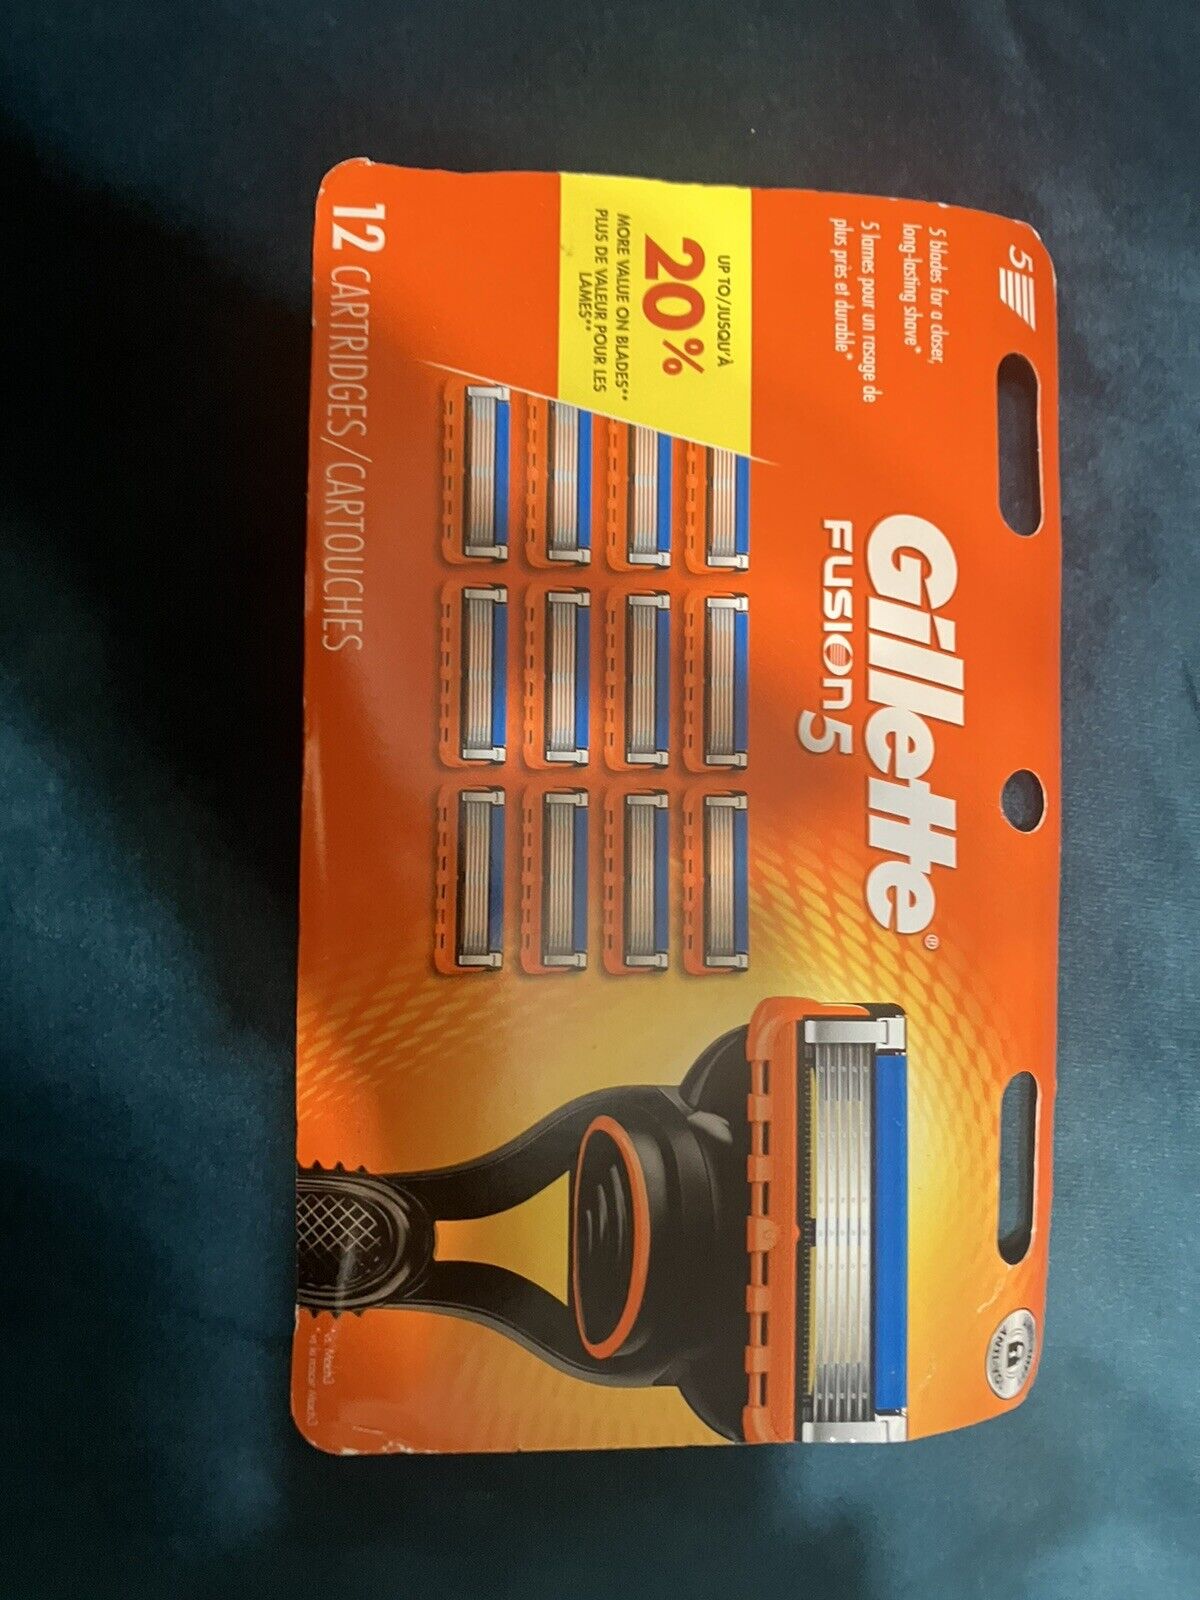 ⭐️GILLETTE FUSION 5 12-PACK CARTRIDGES (NEW SEALED PACKAGE) FREESHIP⭐️